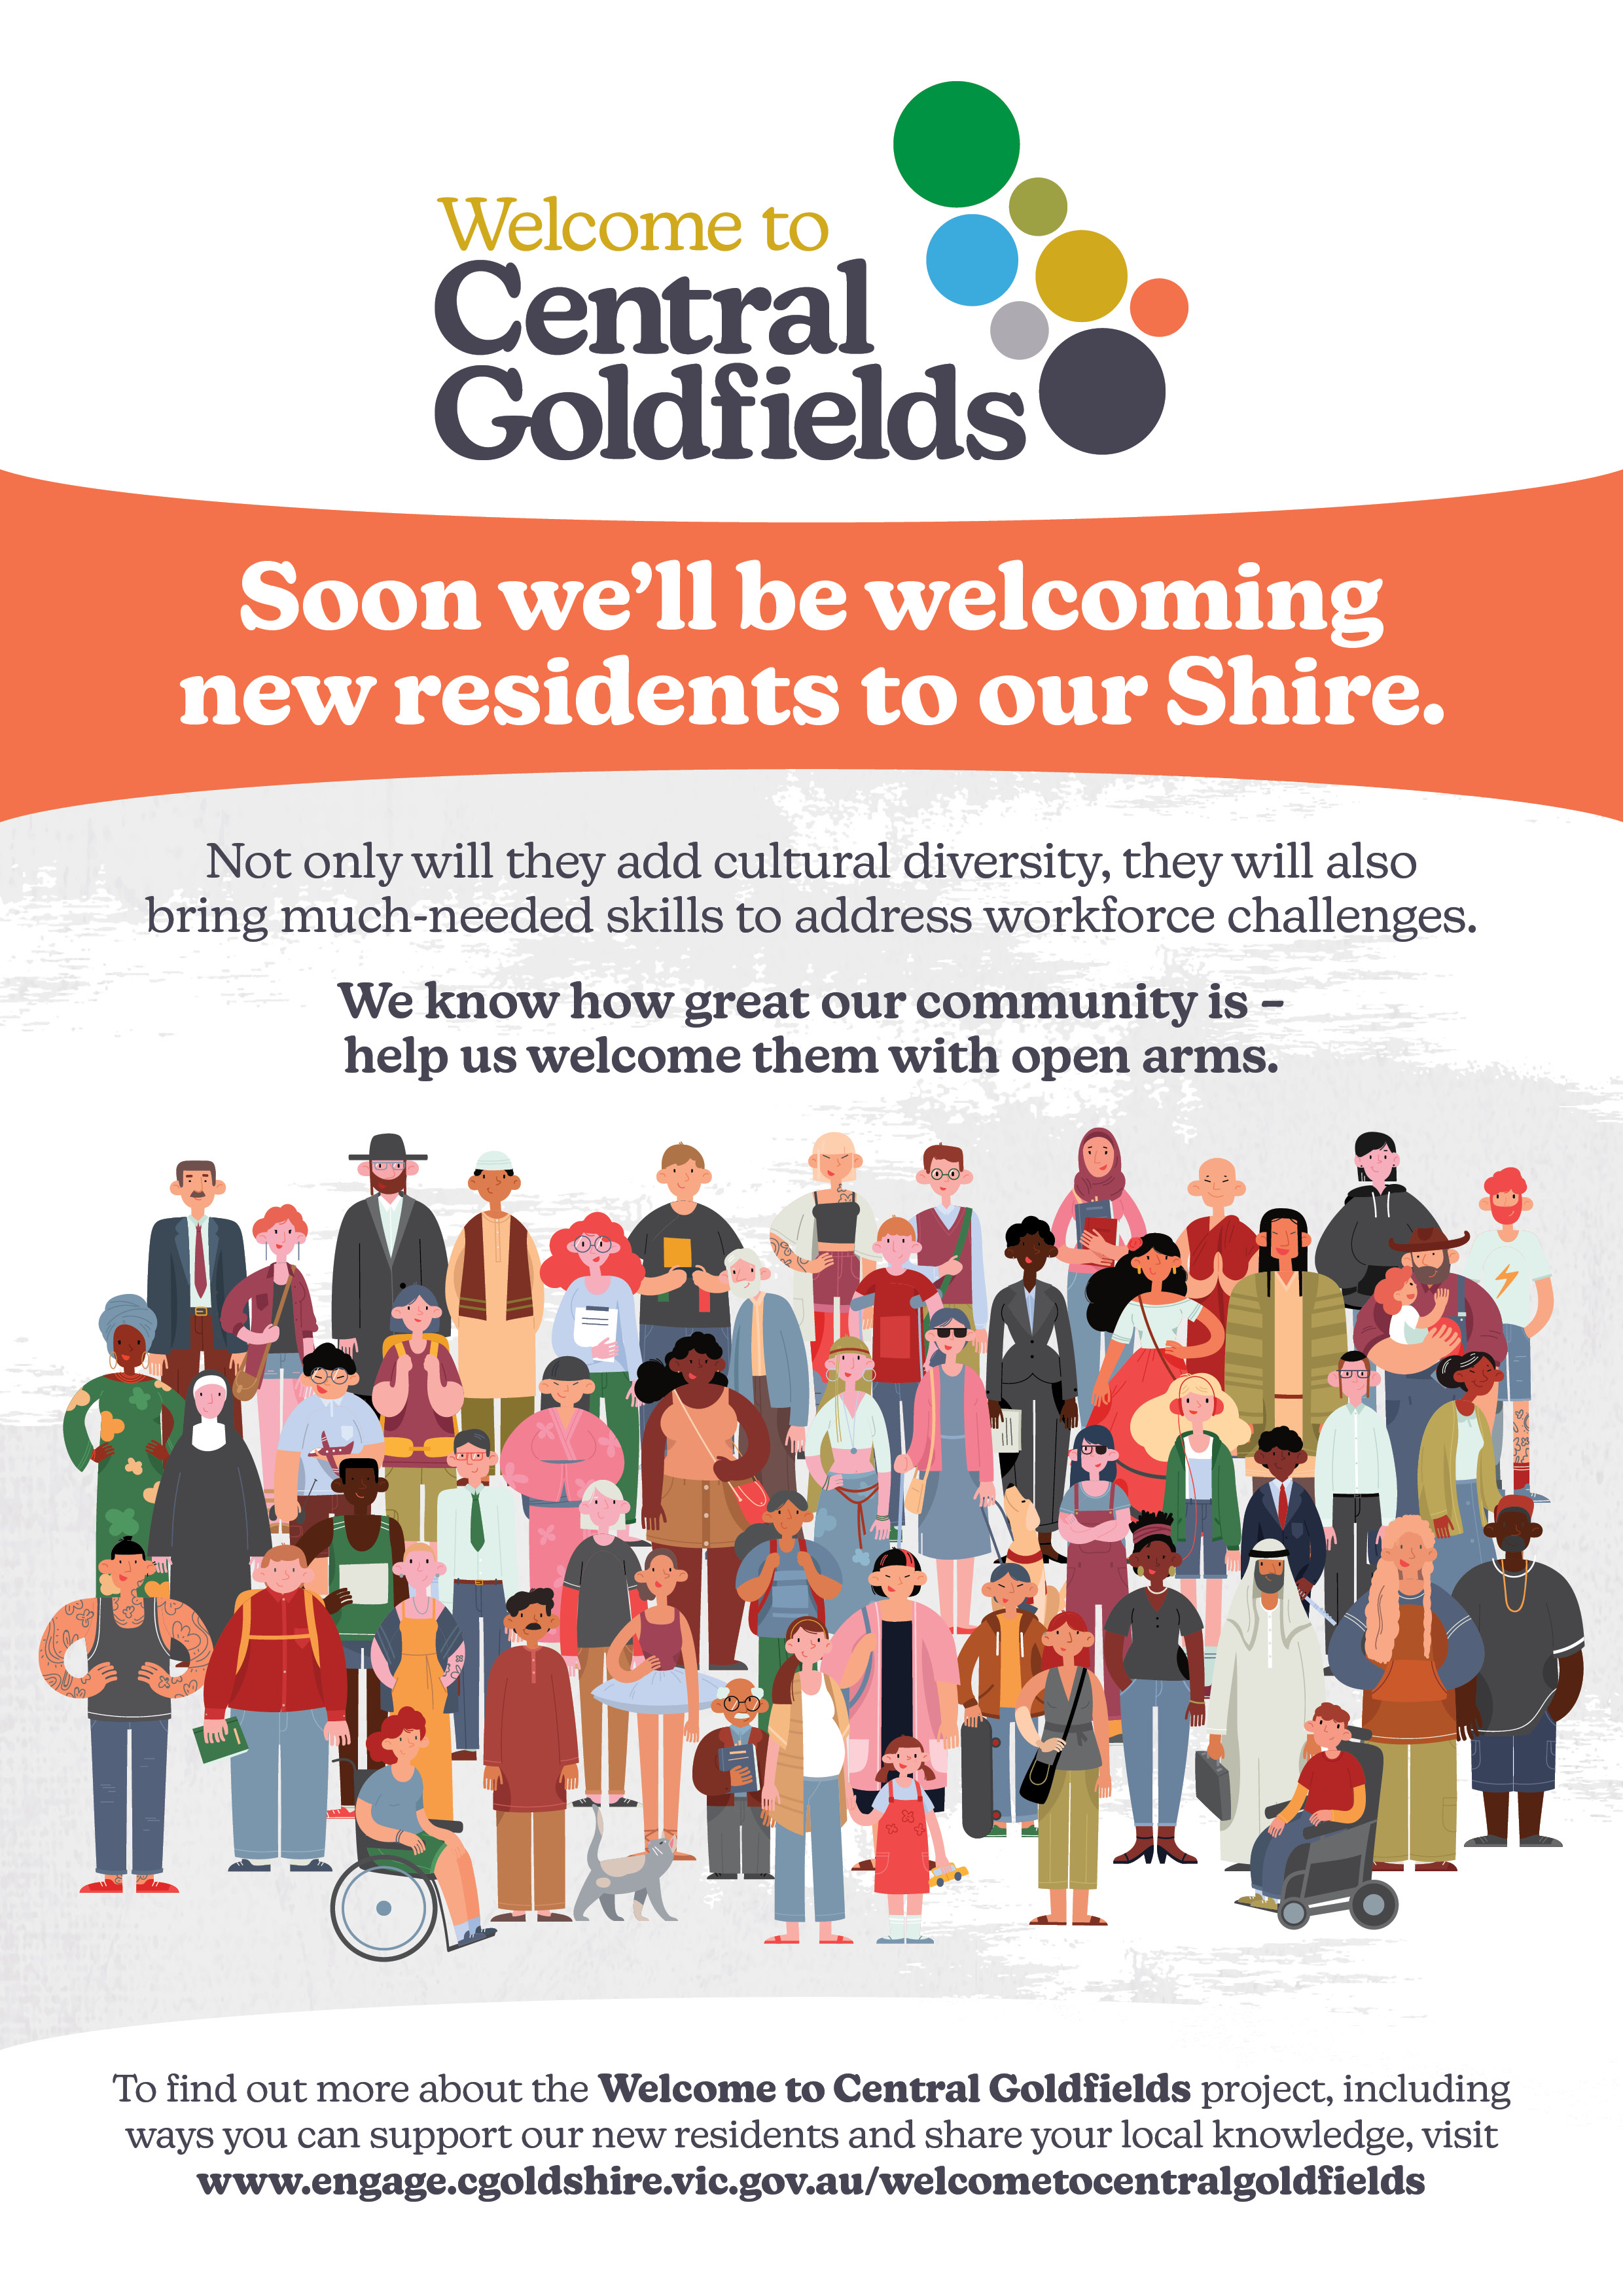 4604-2 Central Goldfields Shire Welcome to Central Goldfields A4 poster.jpg